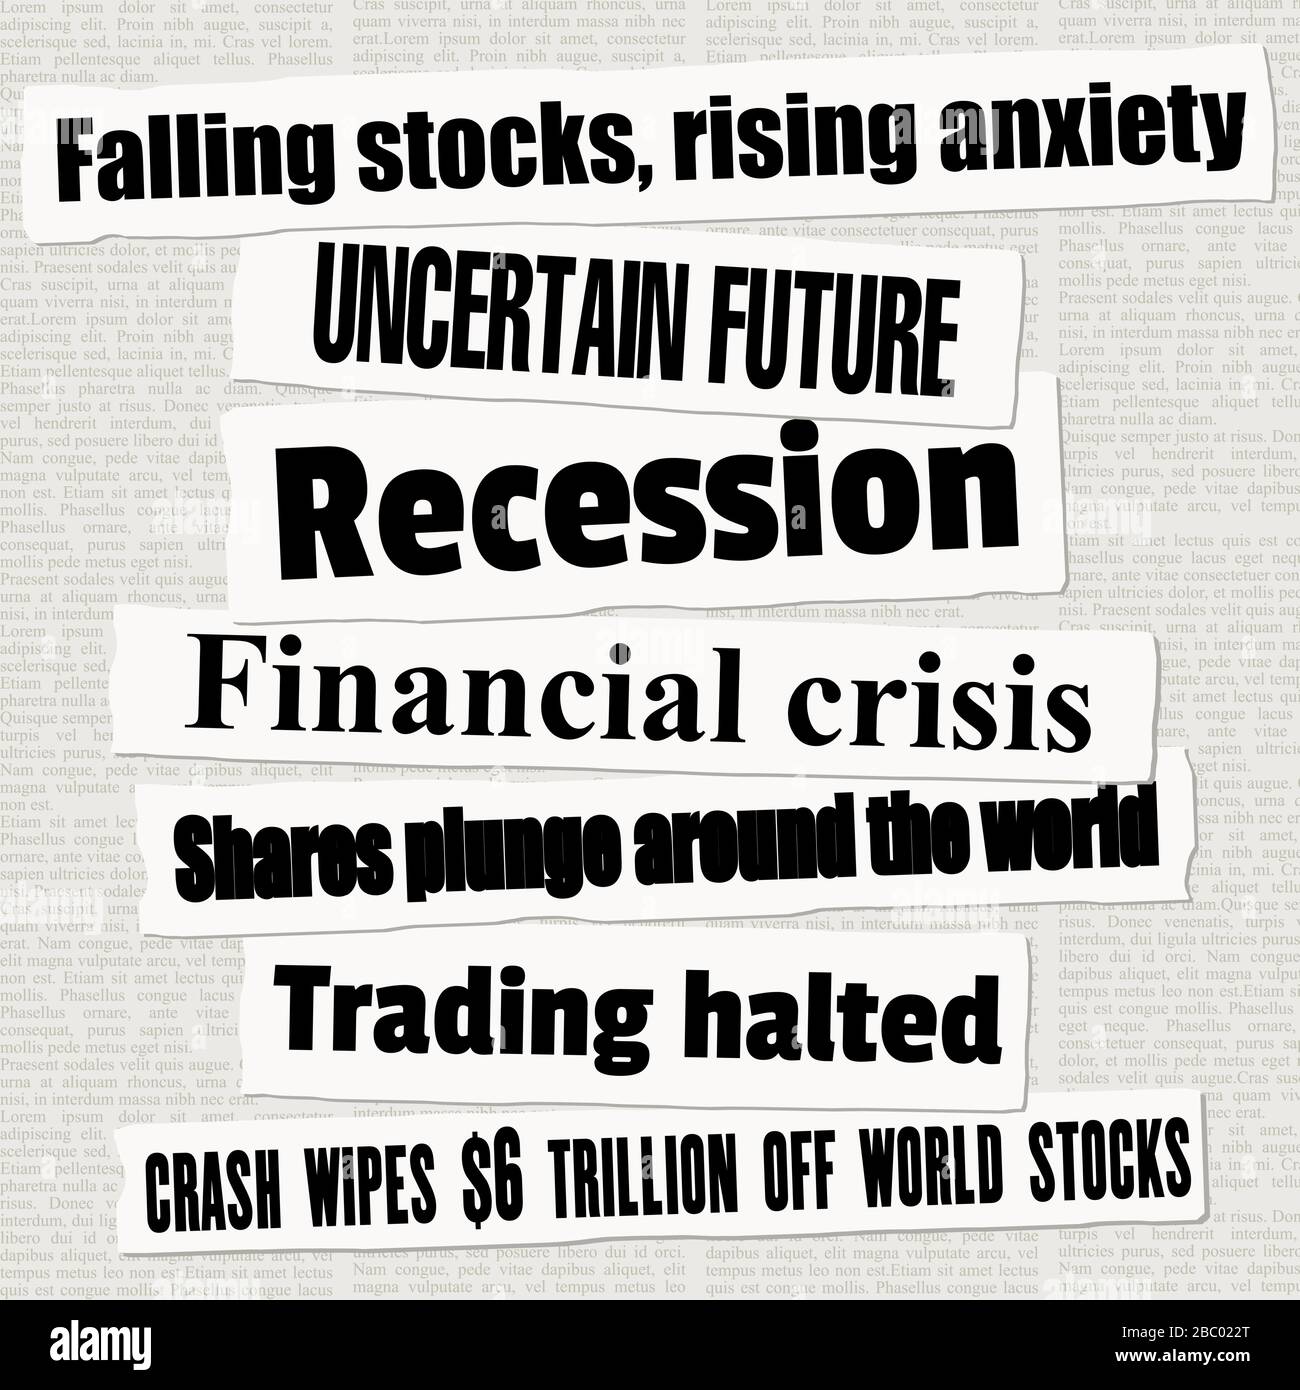 Financial Crisis Newspaper Titles Stock Markets Falling Down News Headline Collection Vector